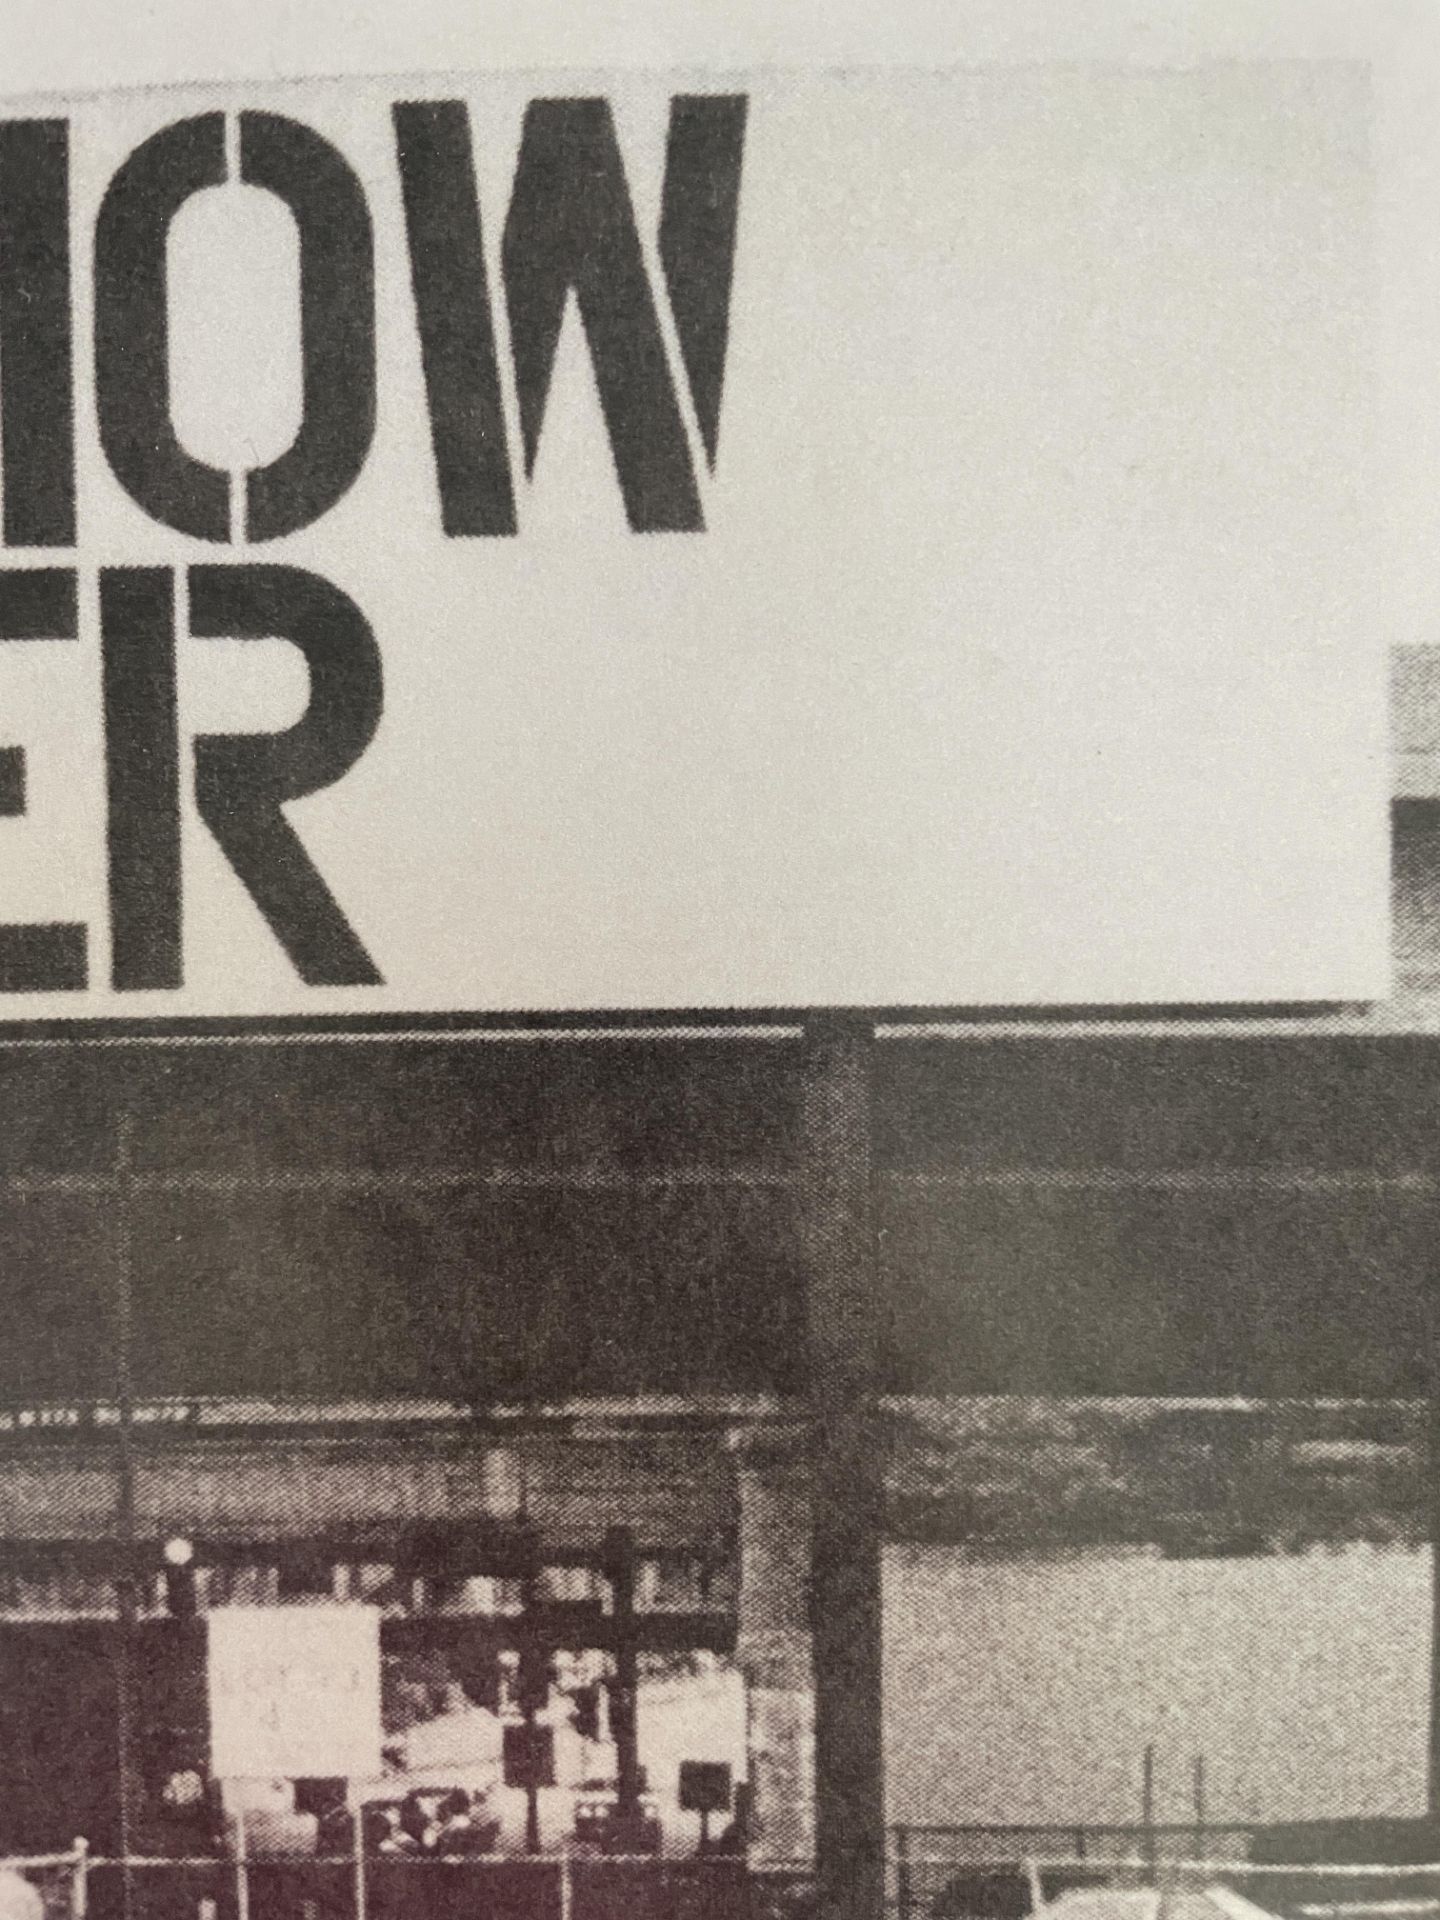 Christopher Wool "The Show is Over" Print - Image 2 of 6